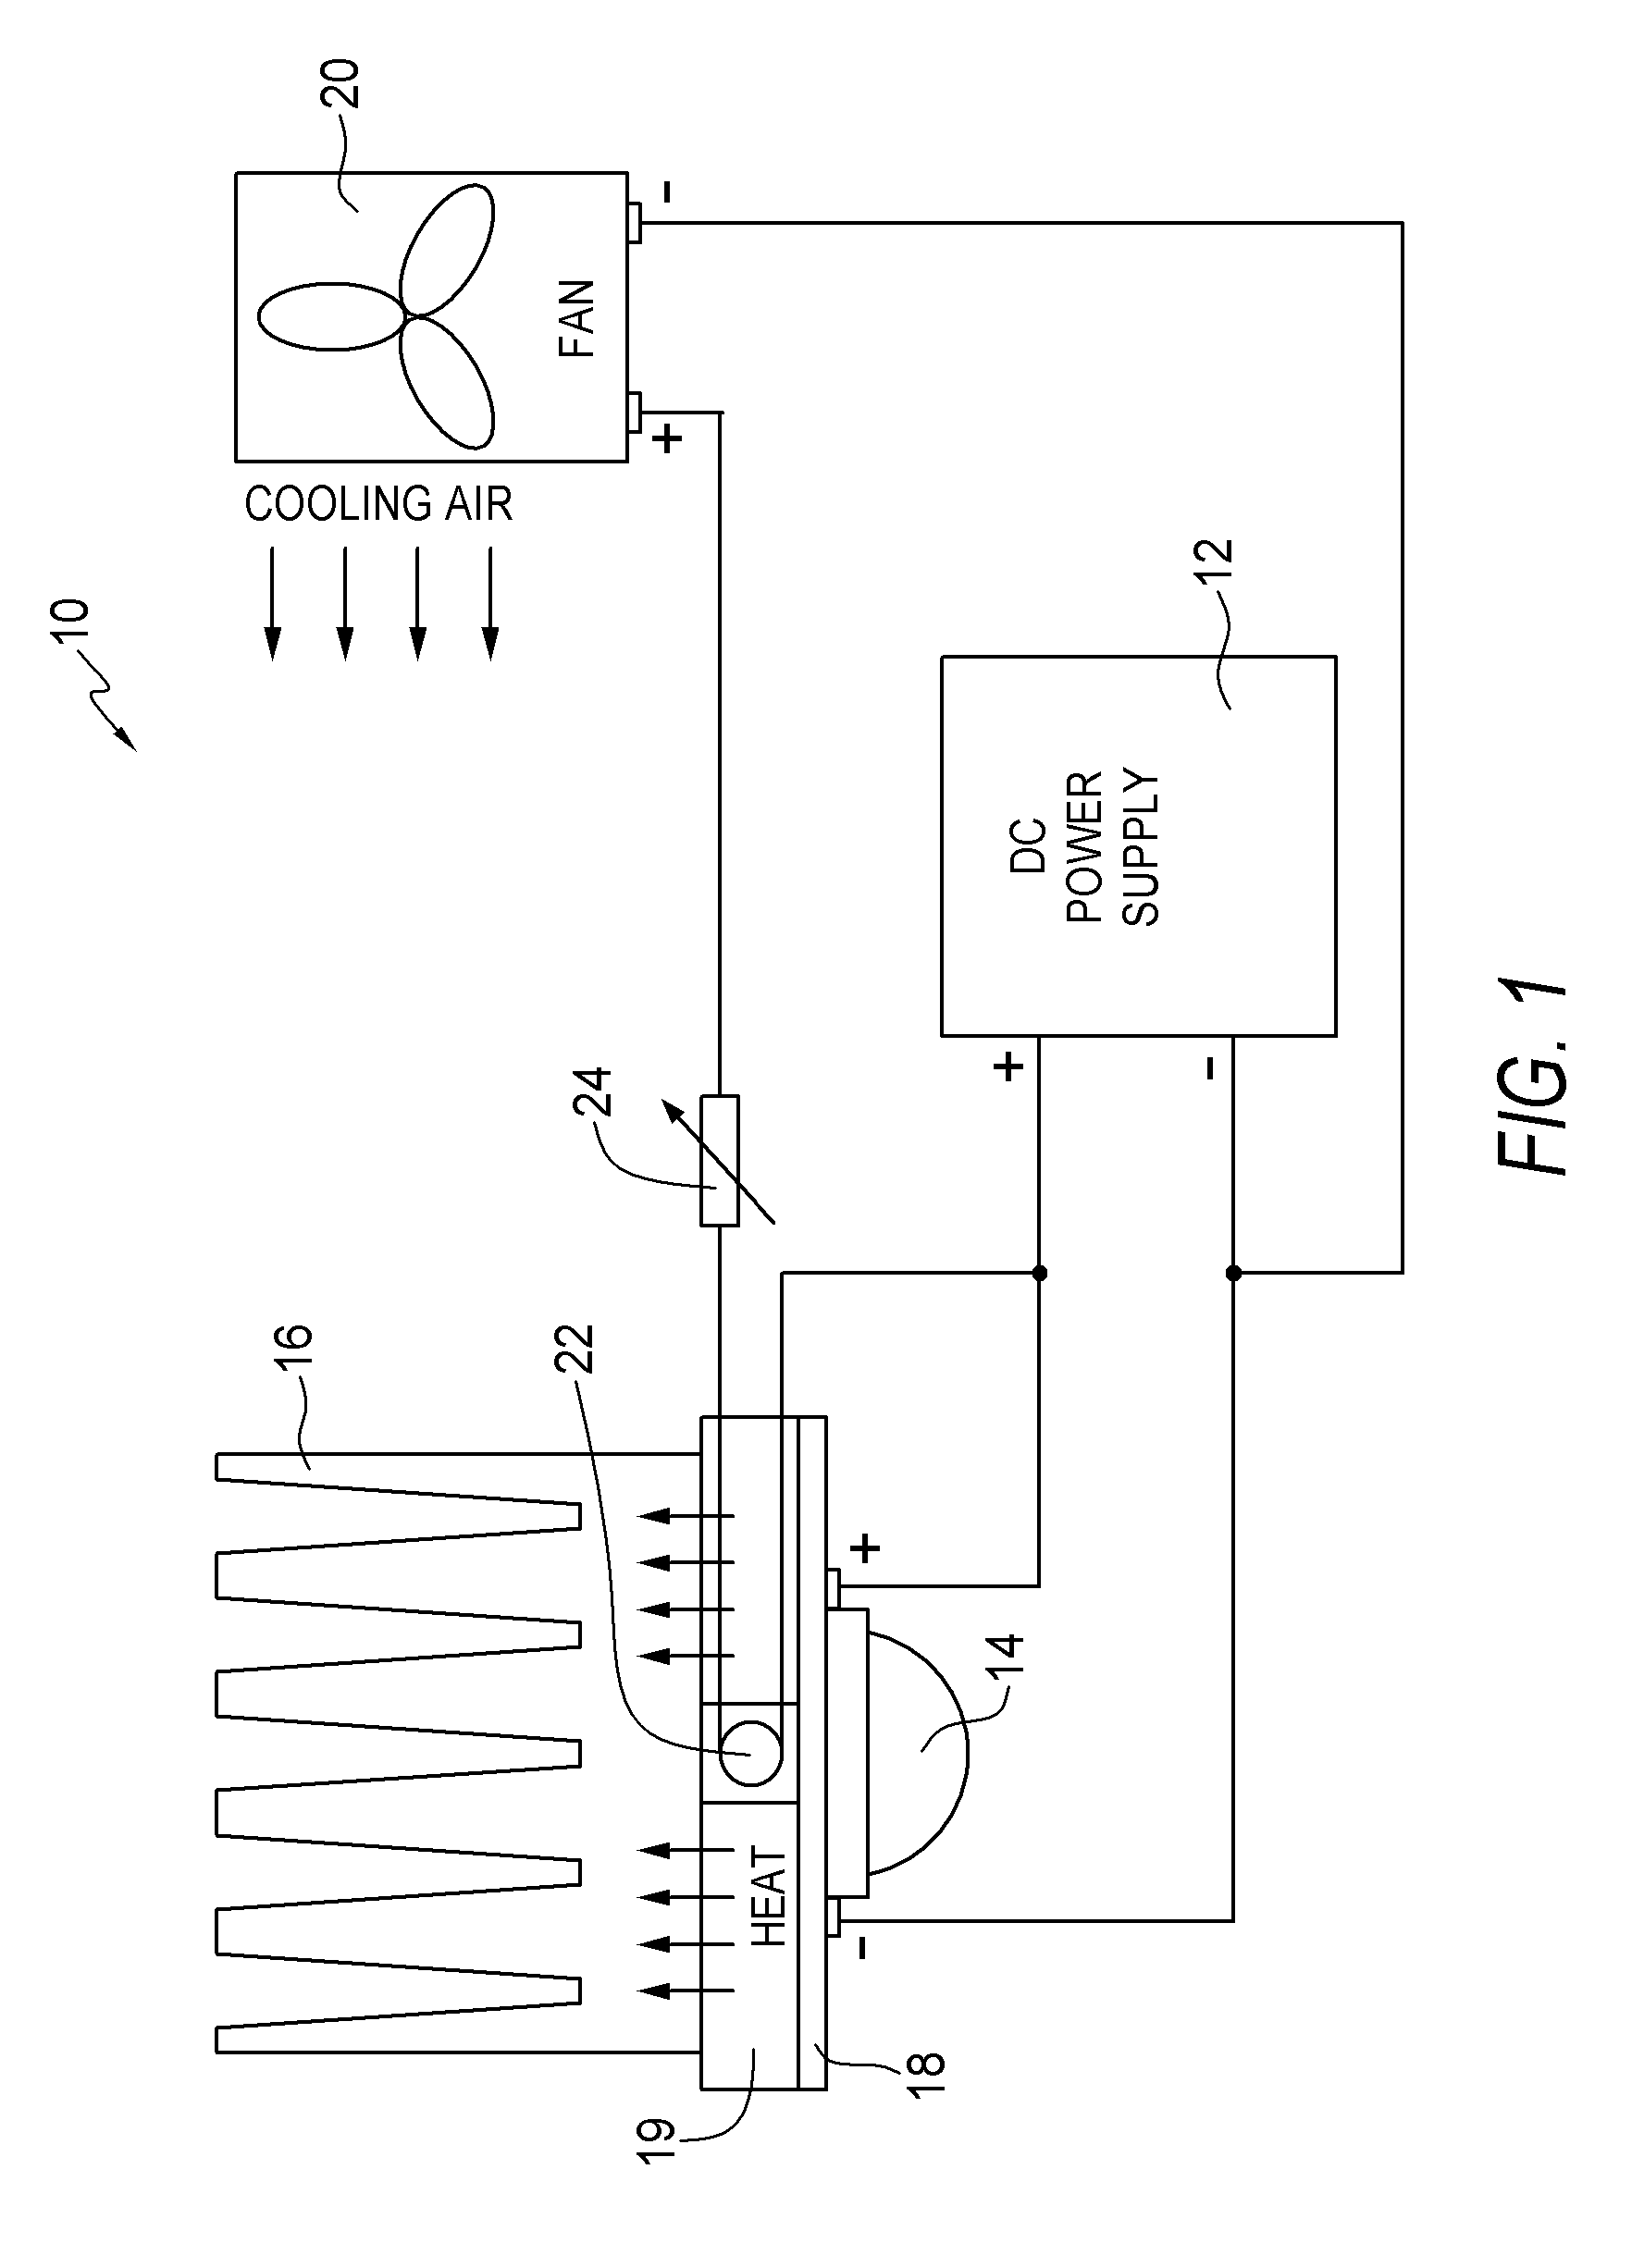 Thermal control system for a light-emitting diode fixture